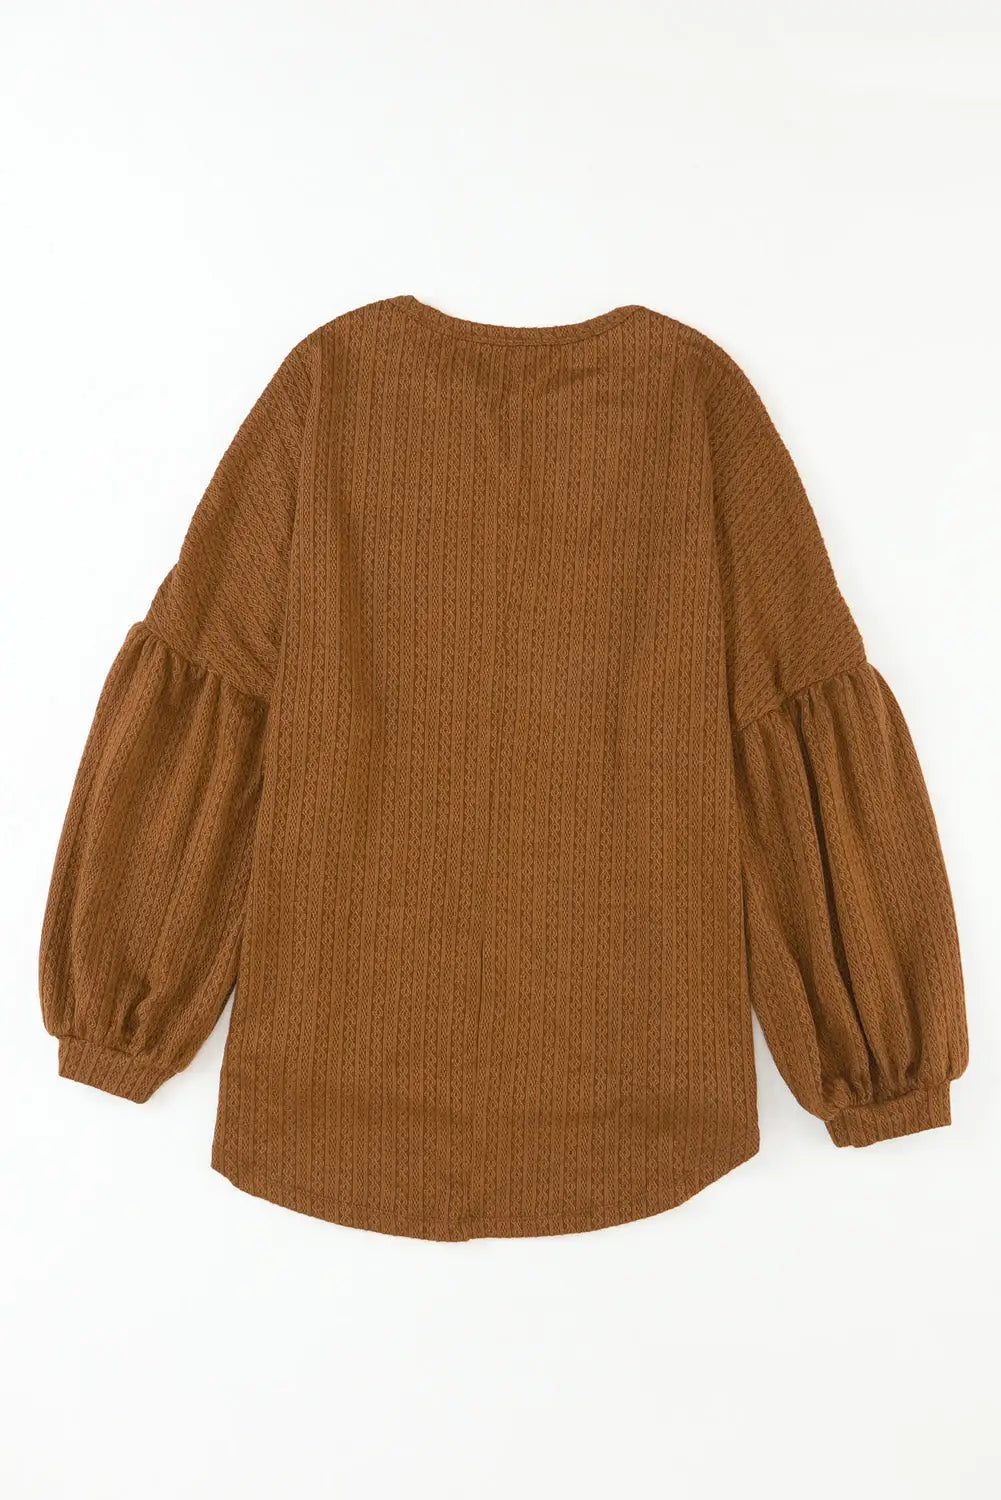 Faux Knit Jacquard Puffy Long Sleeve Top-10